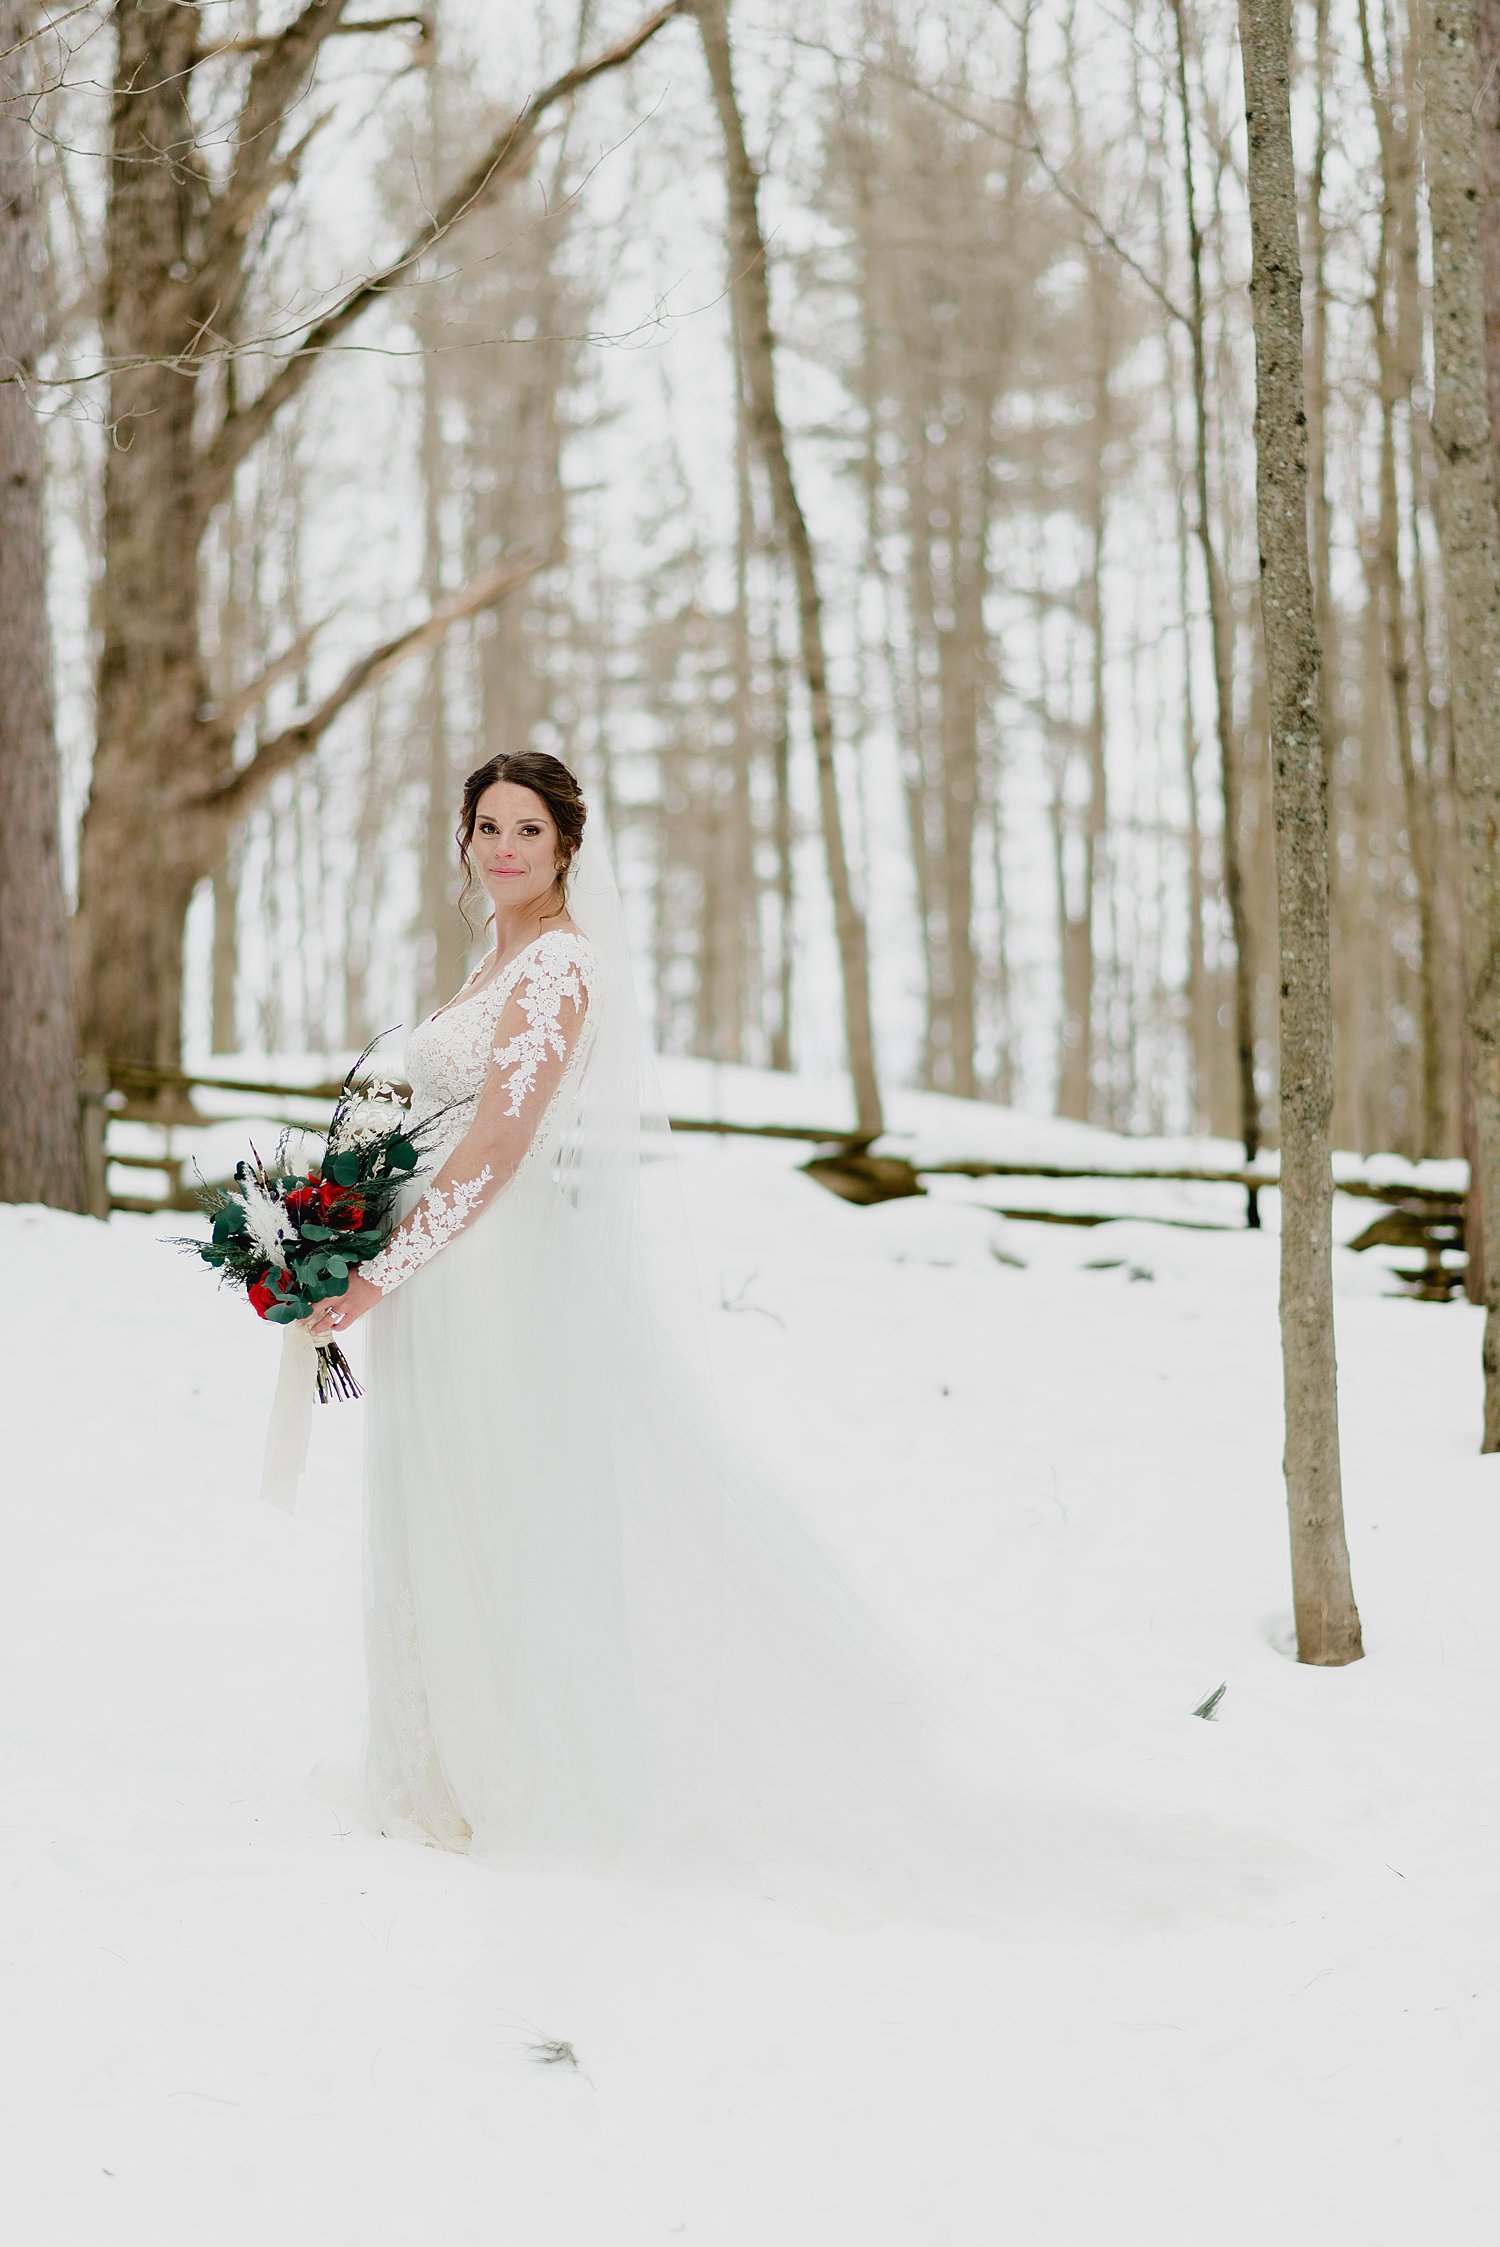 Intimate Winter Elopement at O'Hara Mill Homestead in Madoc, Ontario | Prince Edward County Wedding Photographer | Holly McMurter Photographs_0038.jpg